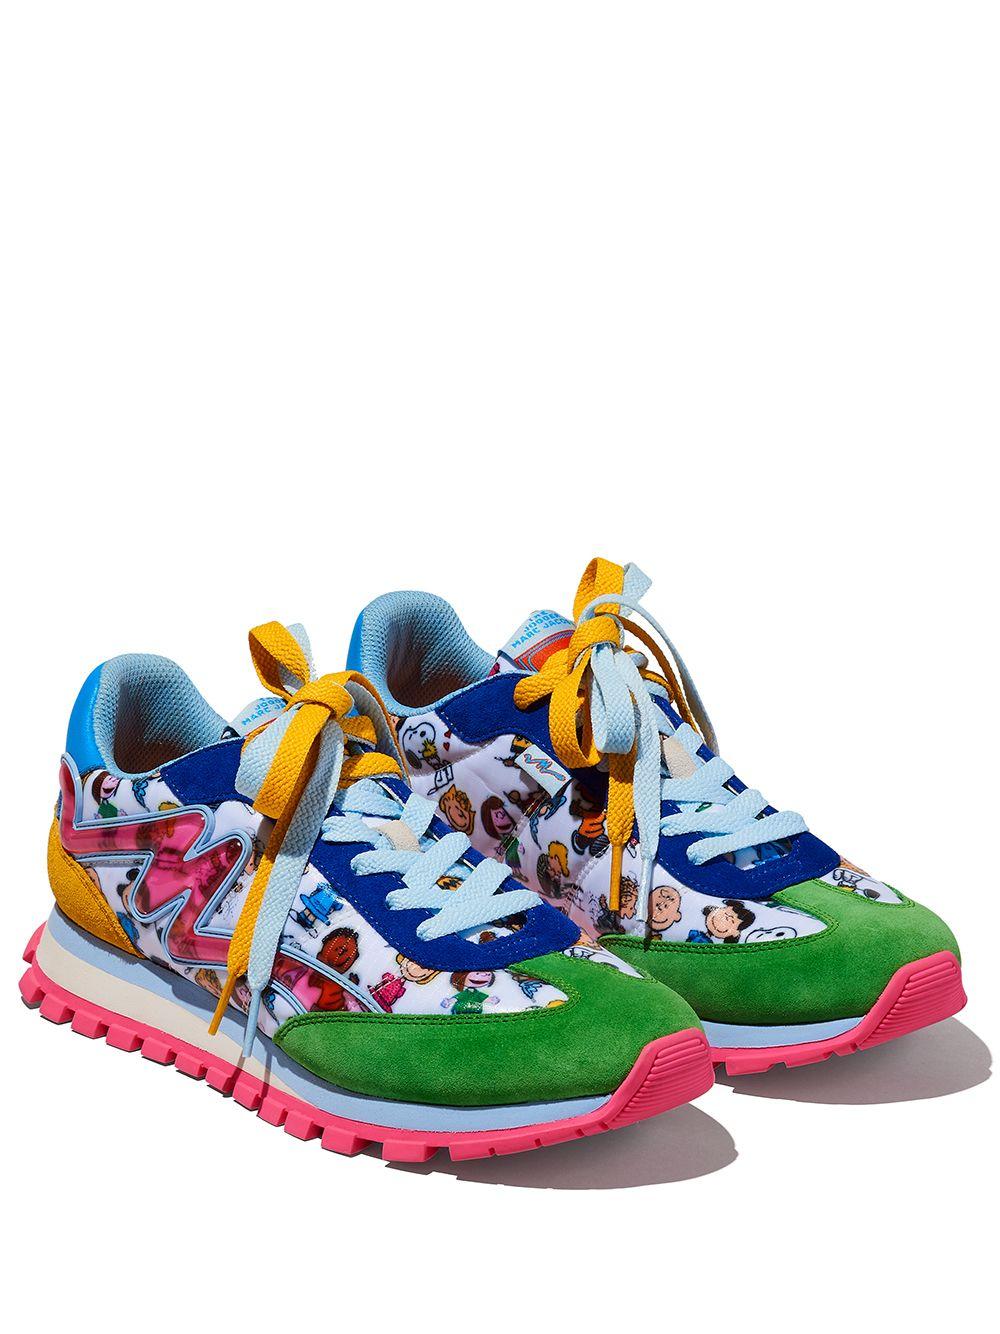 Marc Jacobs Peanuts X The Comics Jogger Sneakers in Blue | Lyst